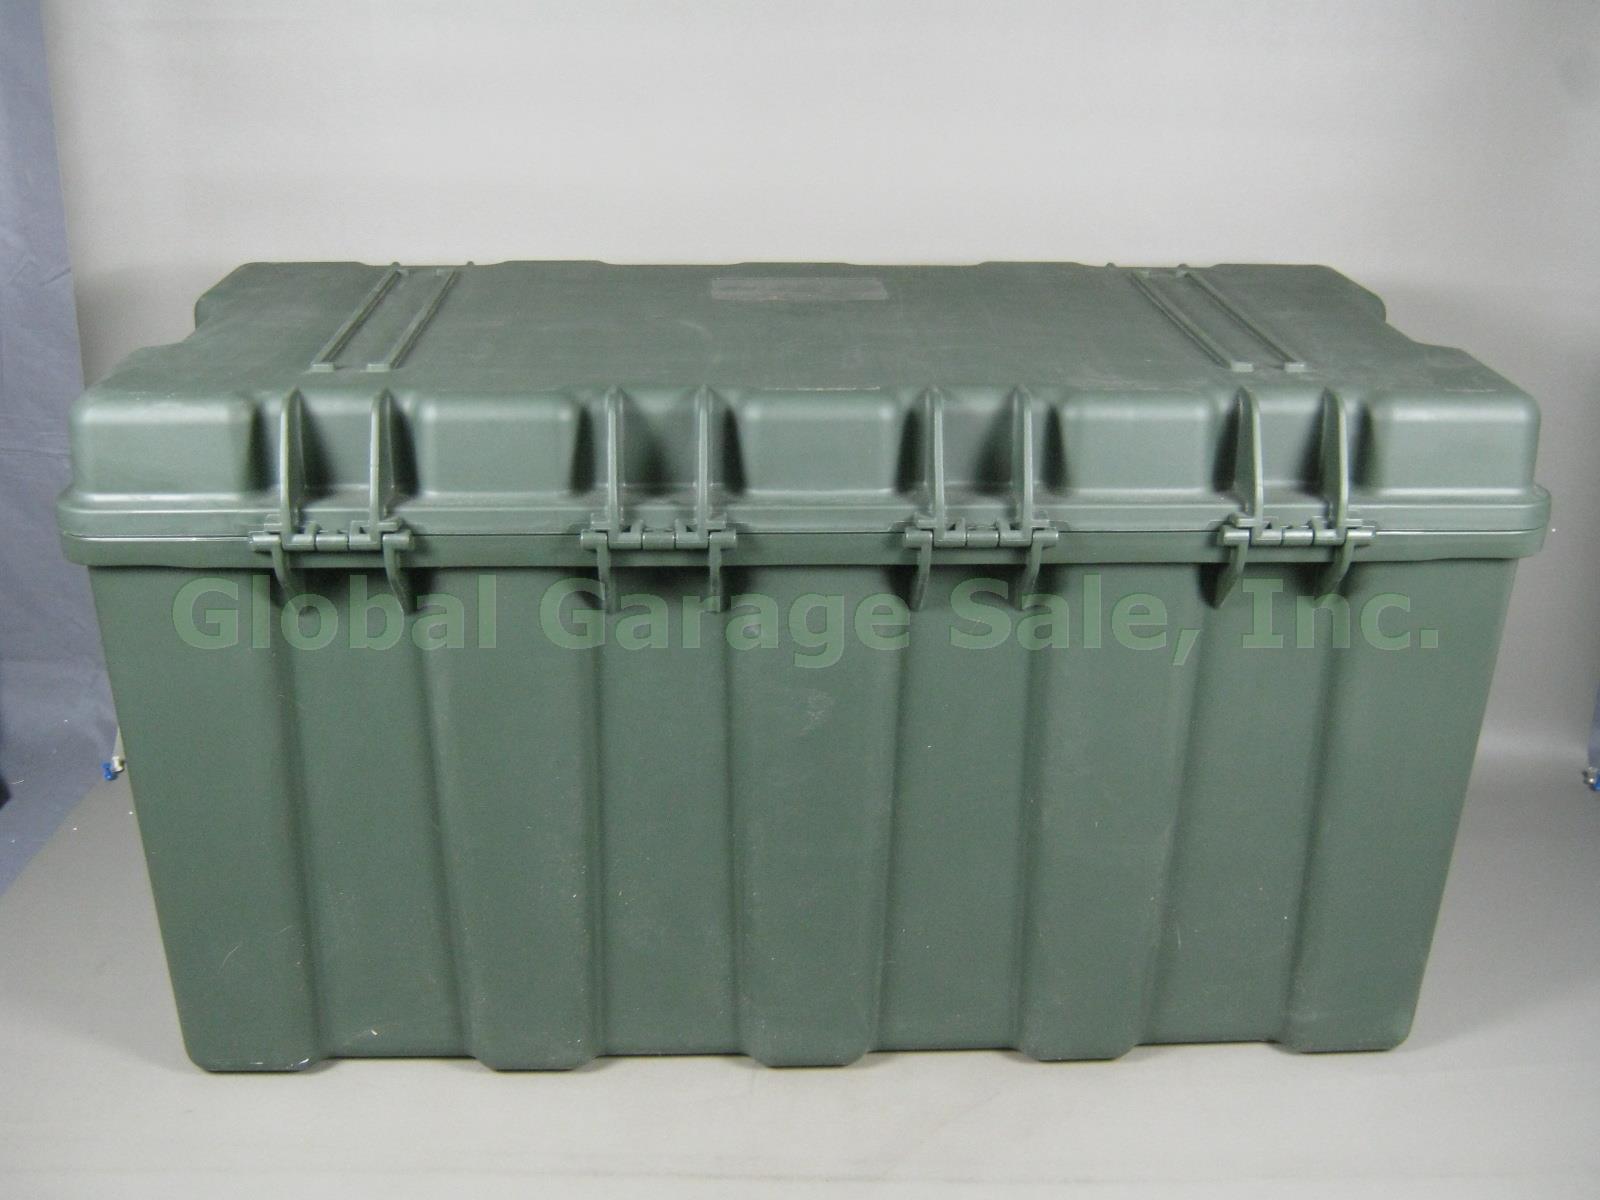 NEW Pelican Hardigg TL 500i US Army Military Foot Locker Trunk With 2 Trays NR! 5